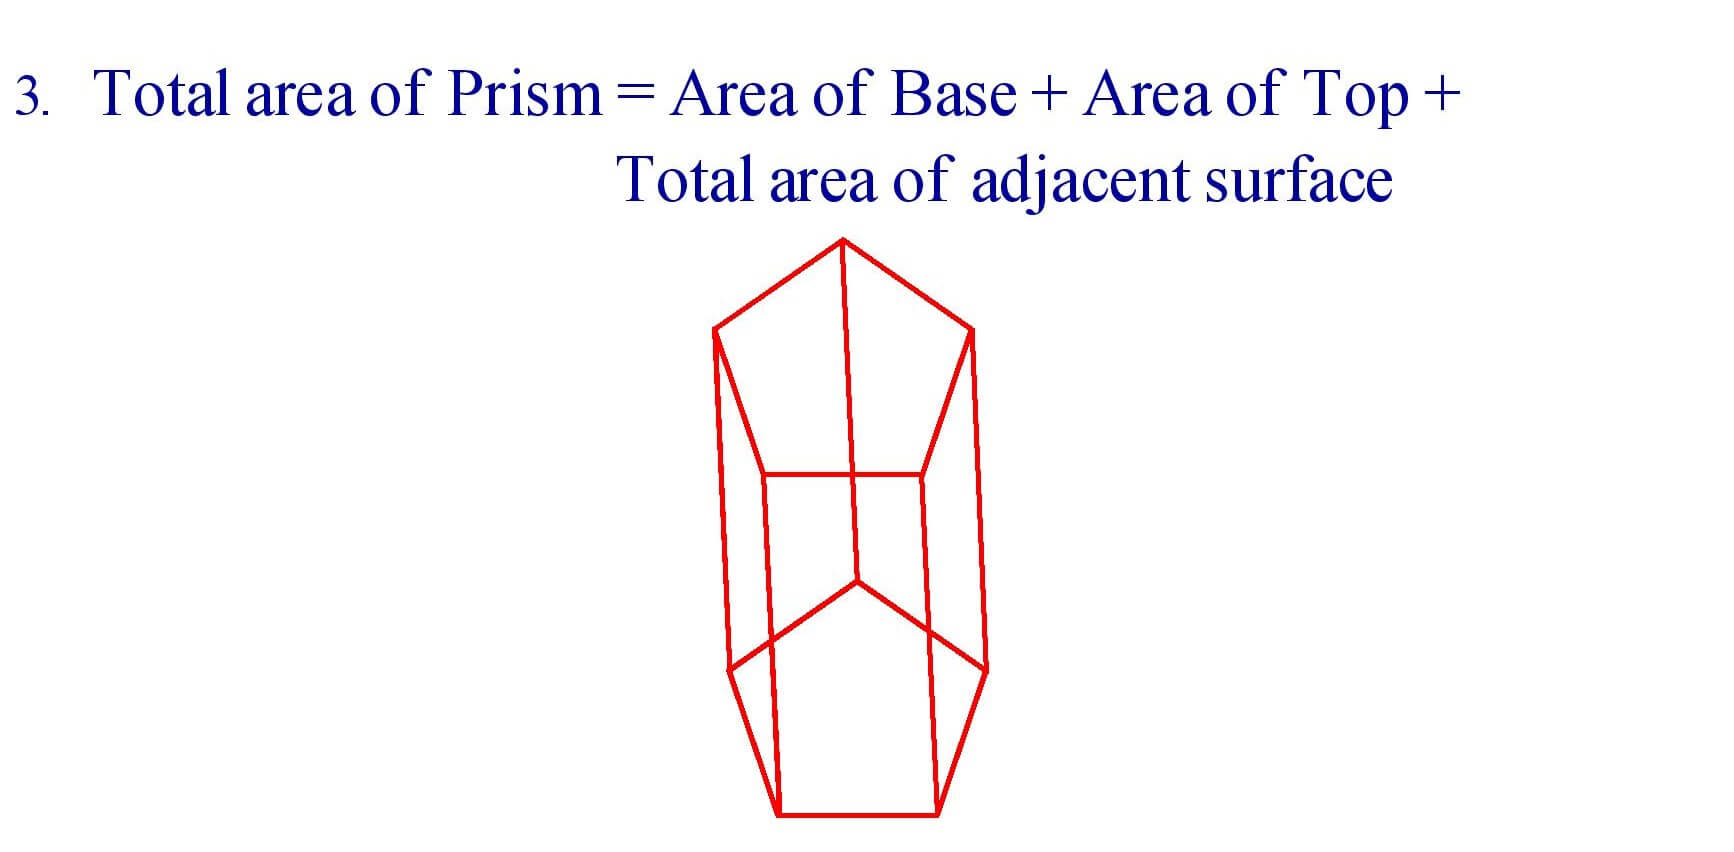 Total area of Prism